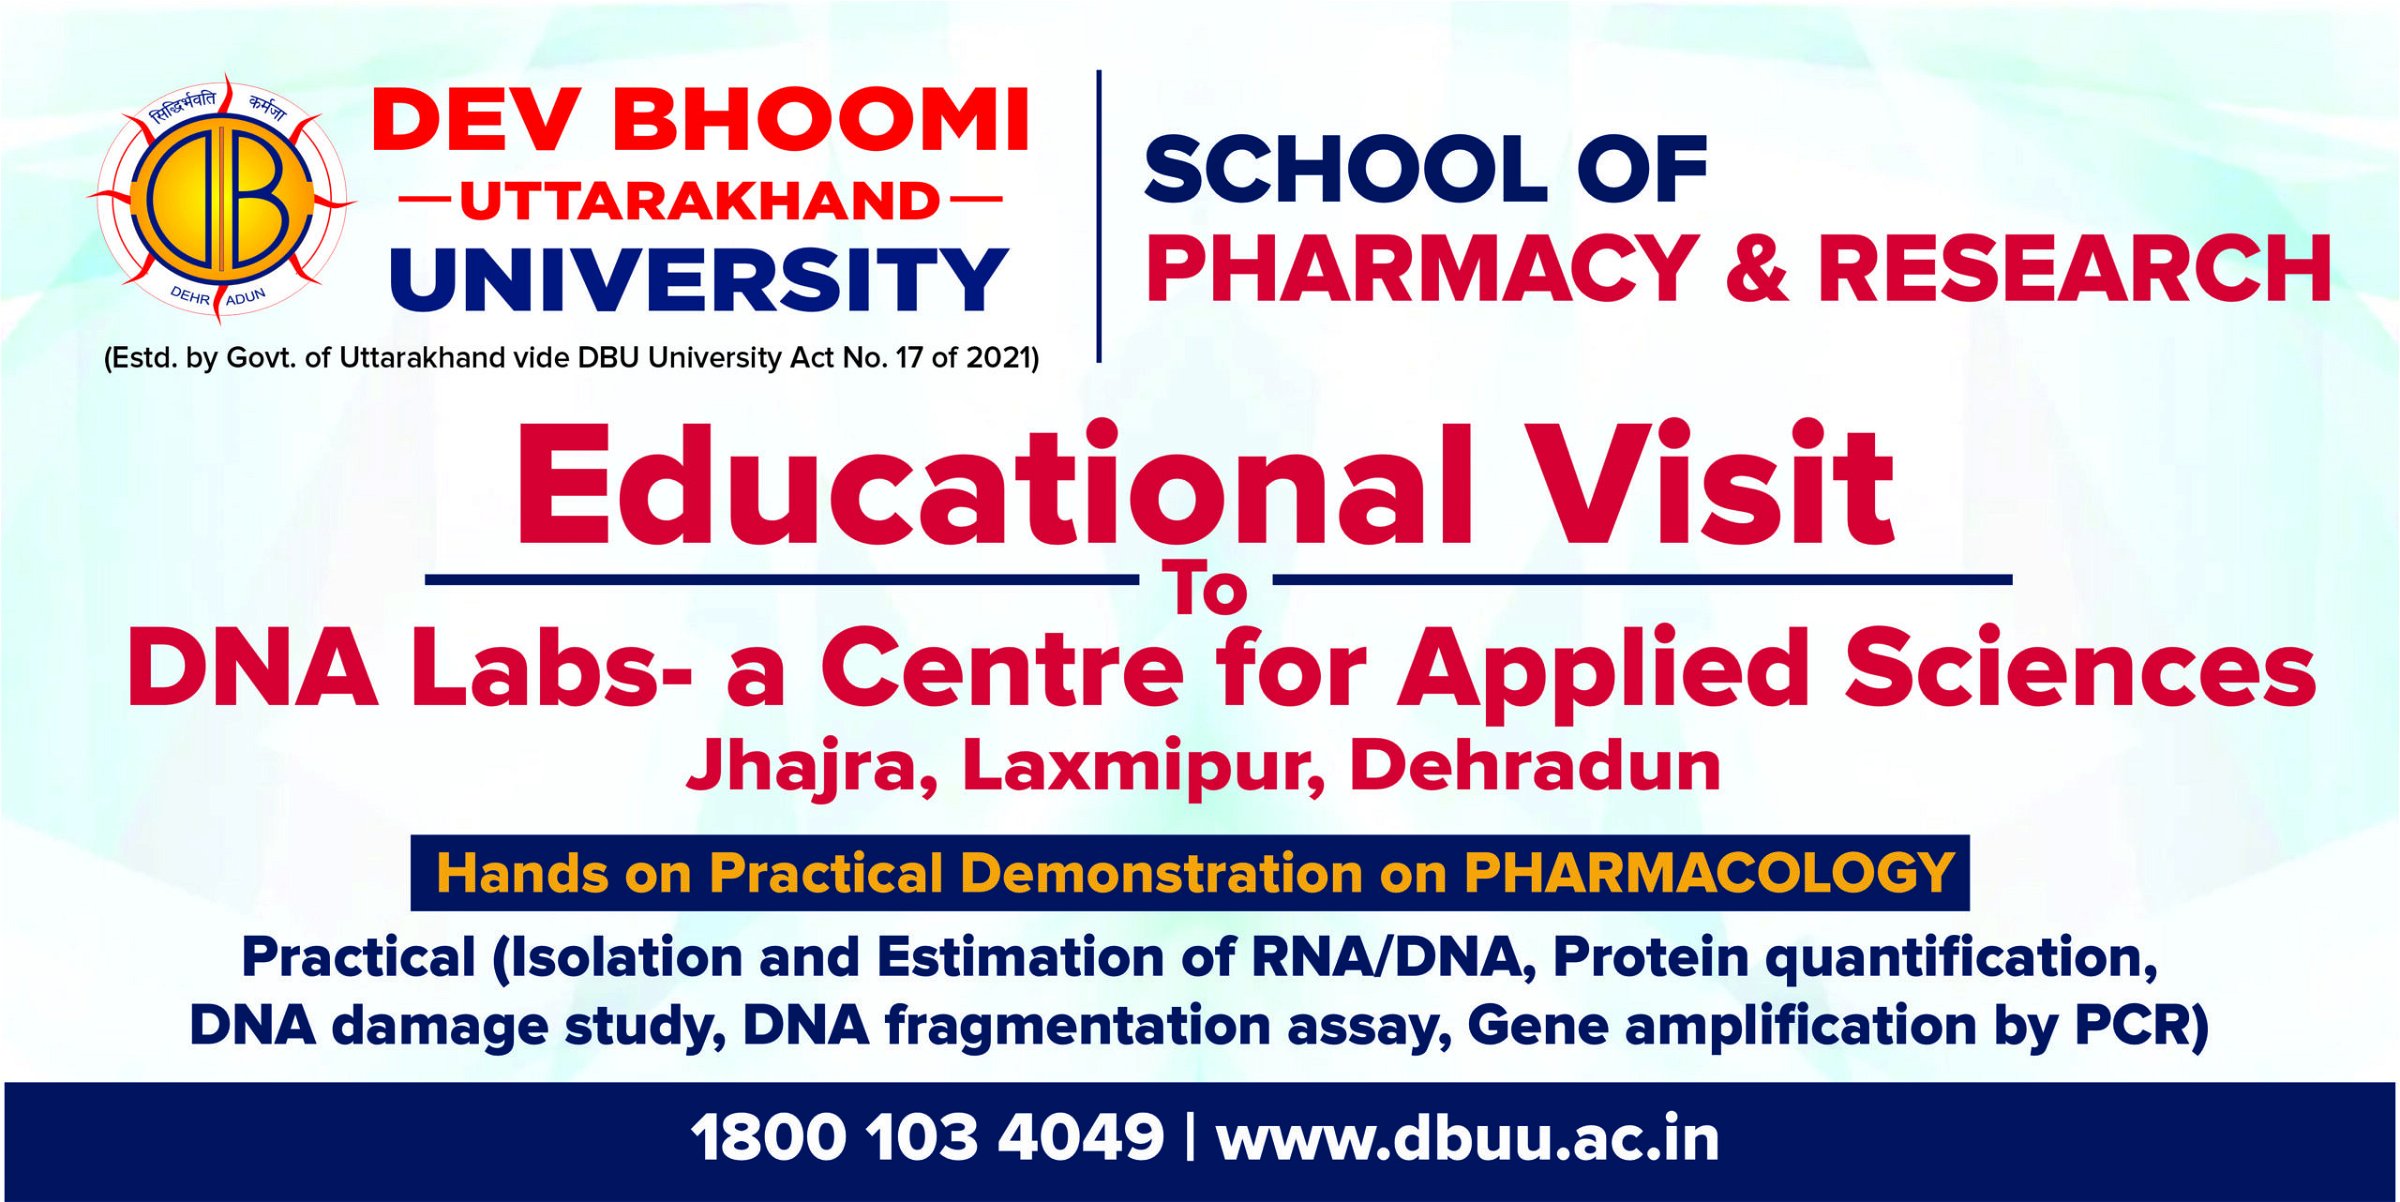 Hands on practical demonstration on Pharmacology Practical